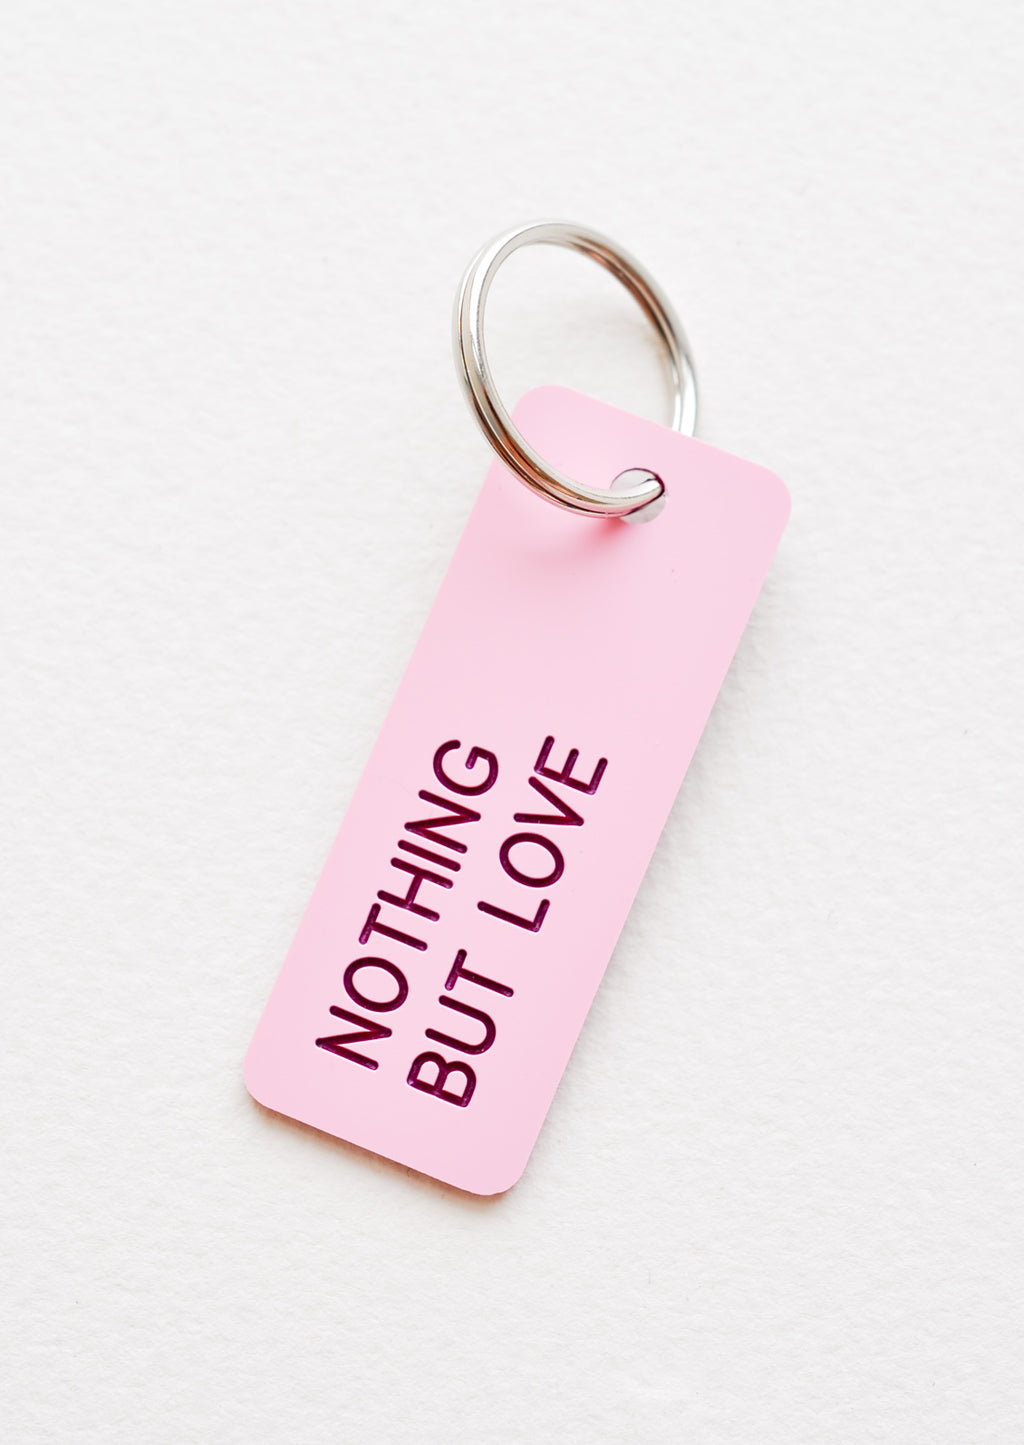 Nothing But Love: Small acrylic keychain, pink background with red words that says "NOTHING BUT LOVE"